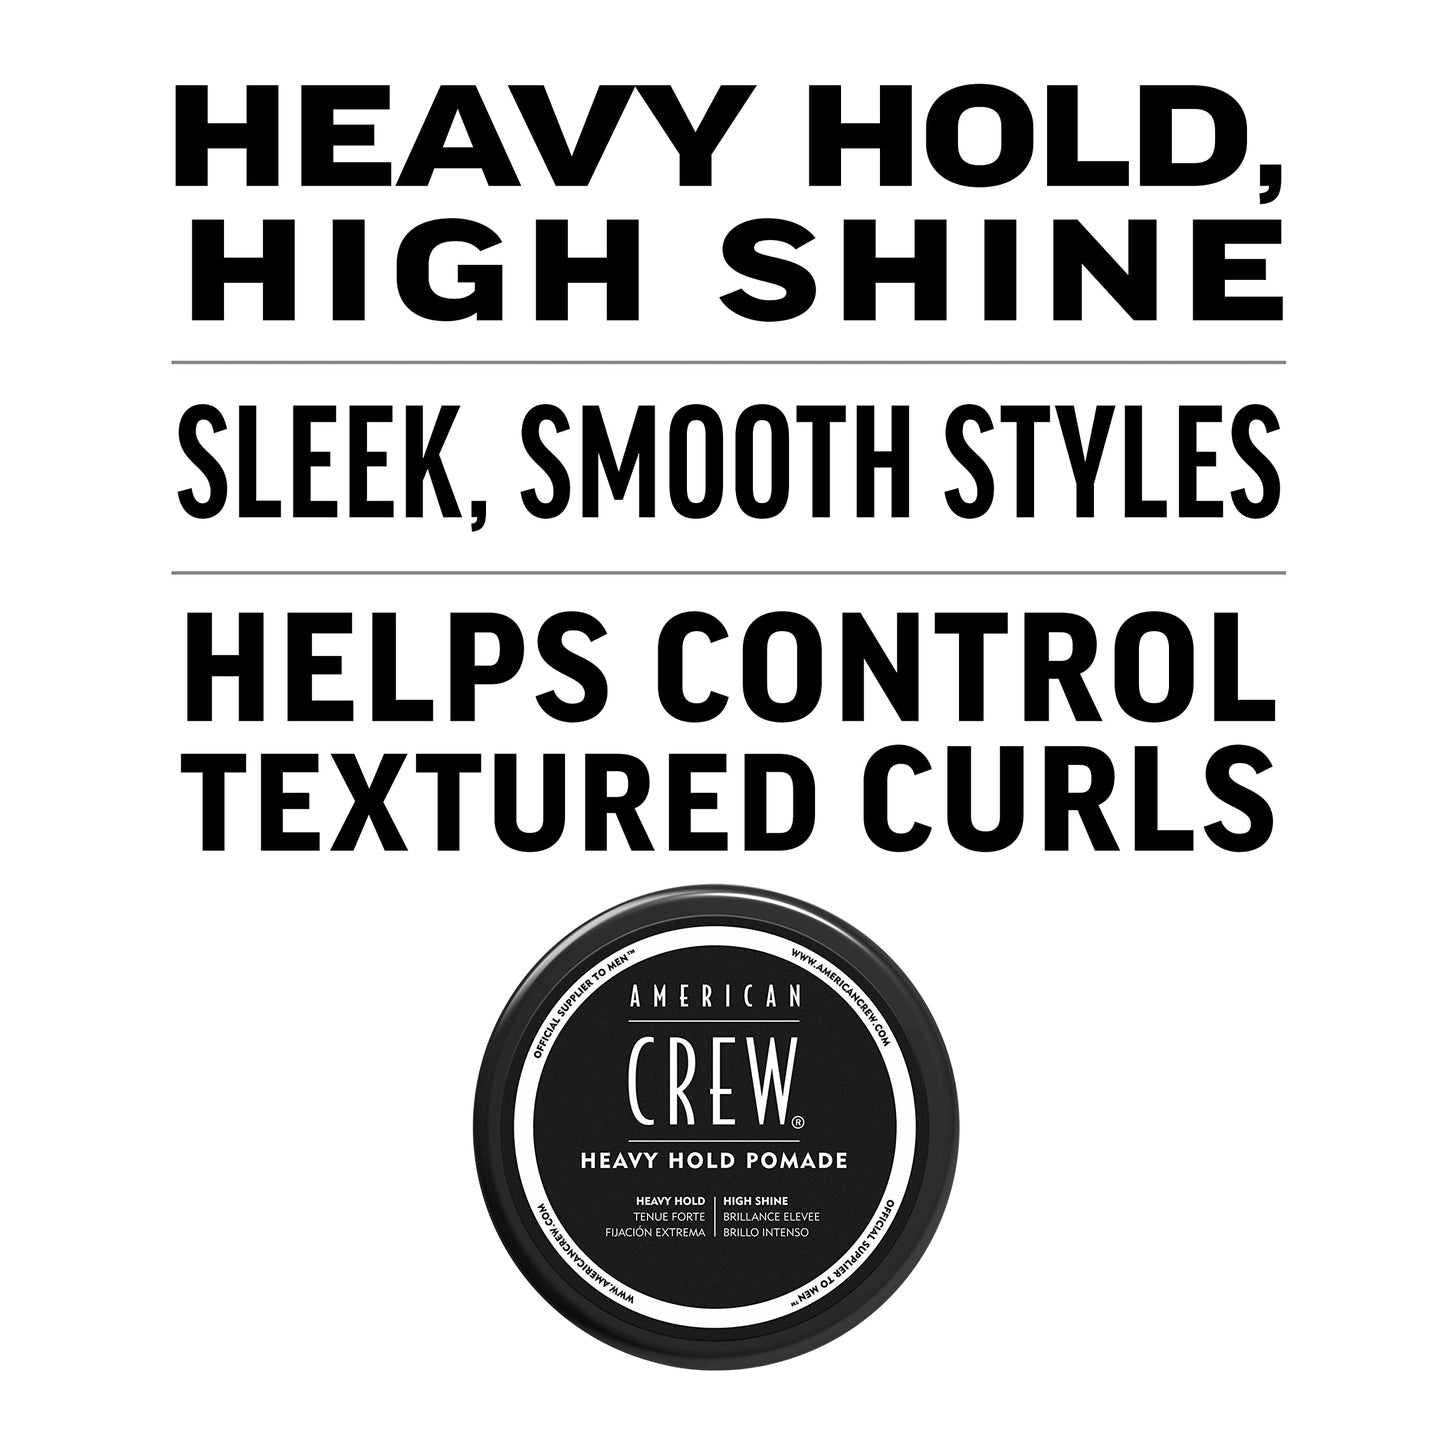 American Crew Men's Hair Pomade, Like Hair Gel with Heavy Hold & High Shine, 3 Oz (Pack of 1)